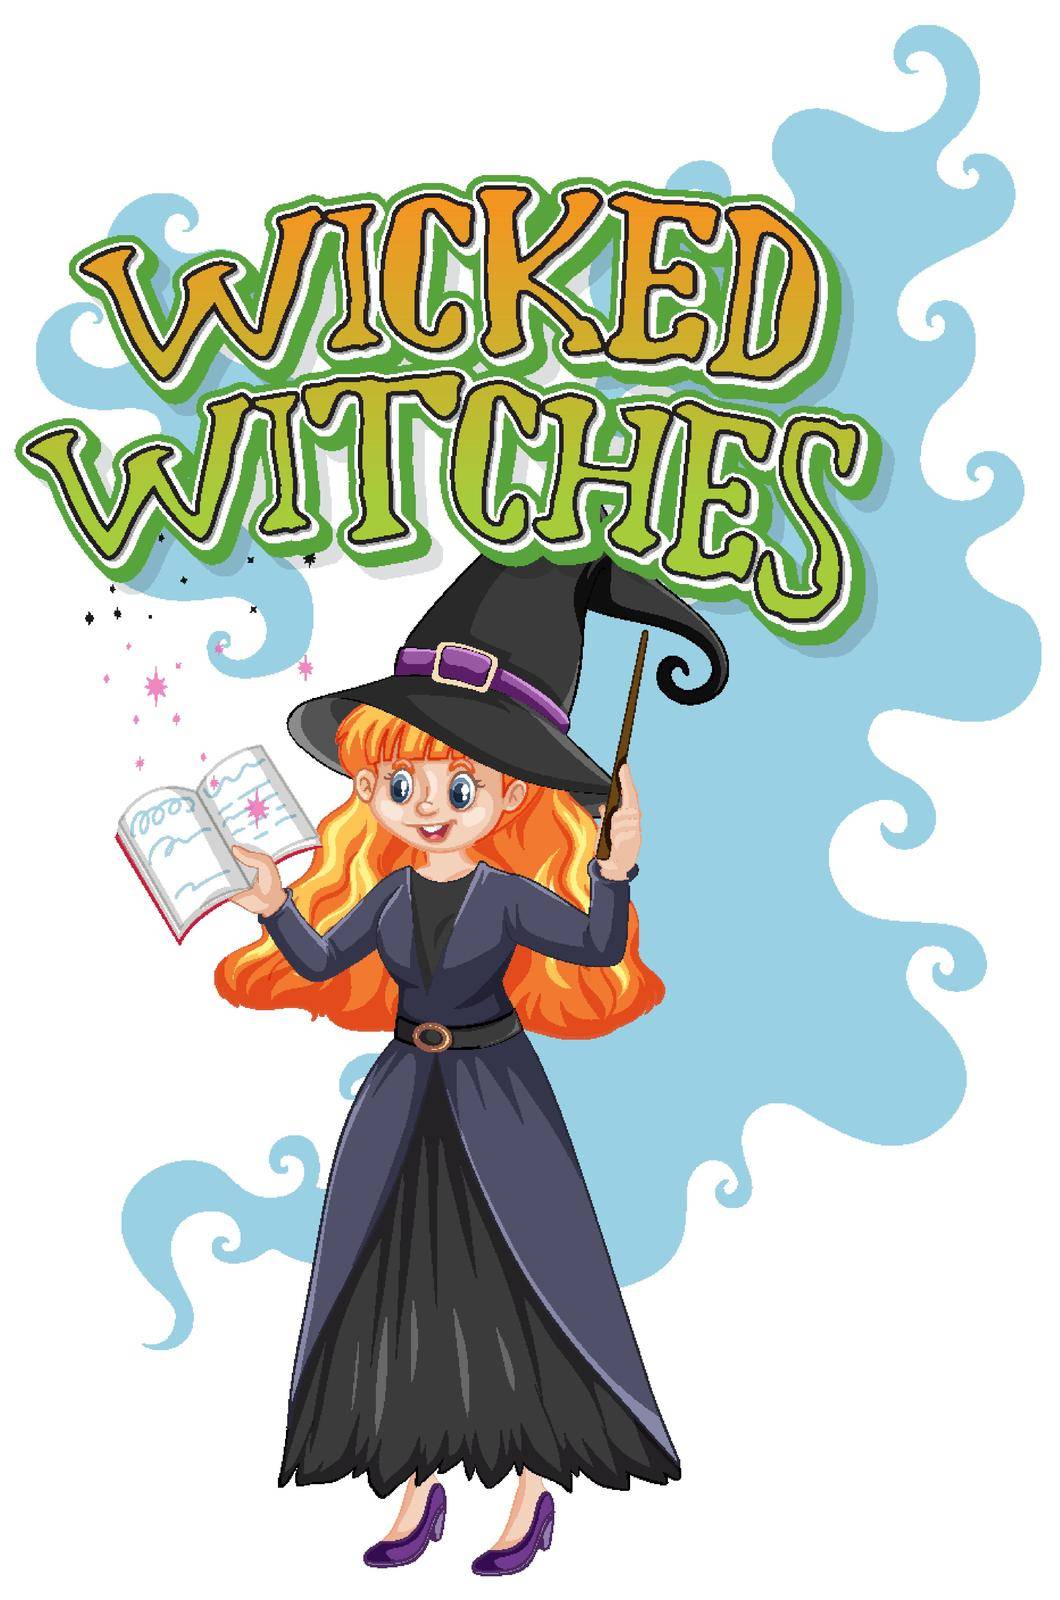 Wicked witches logo on white background illustration